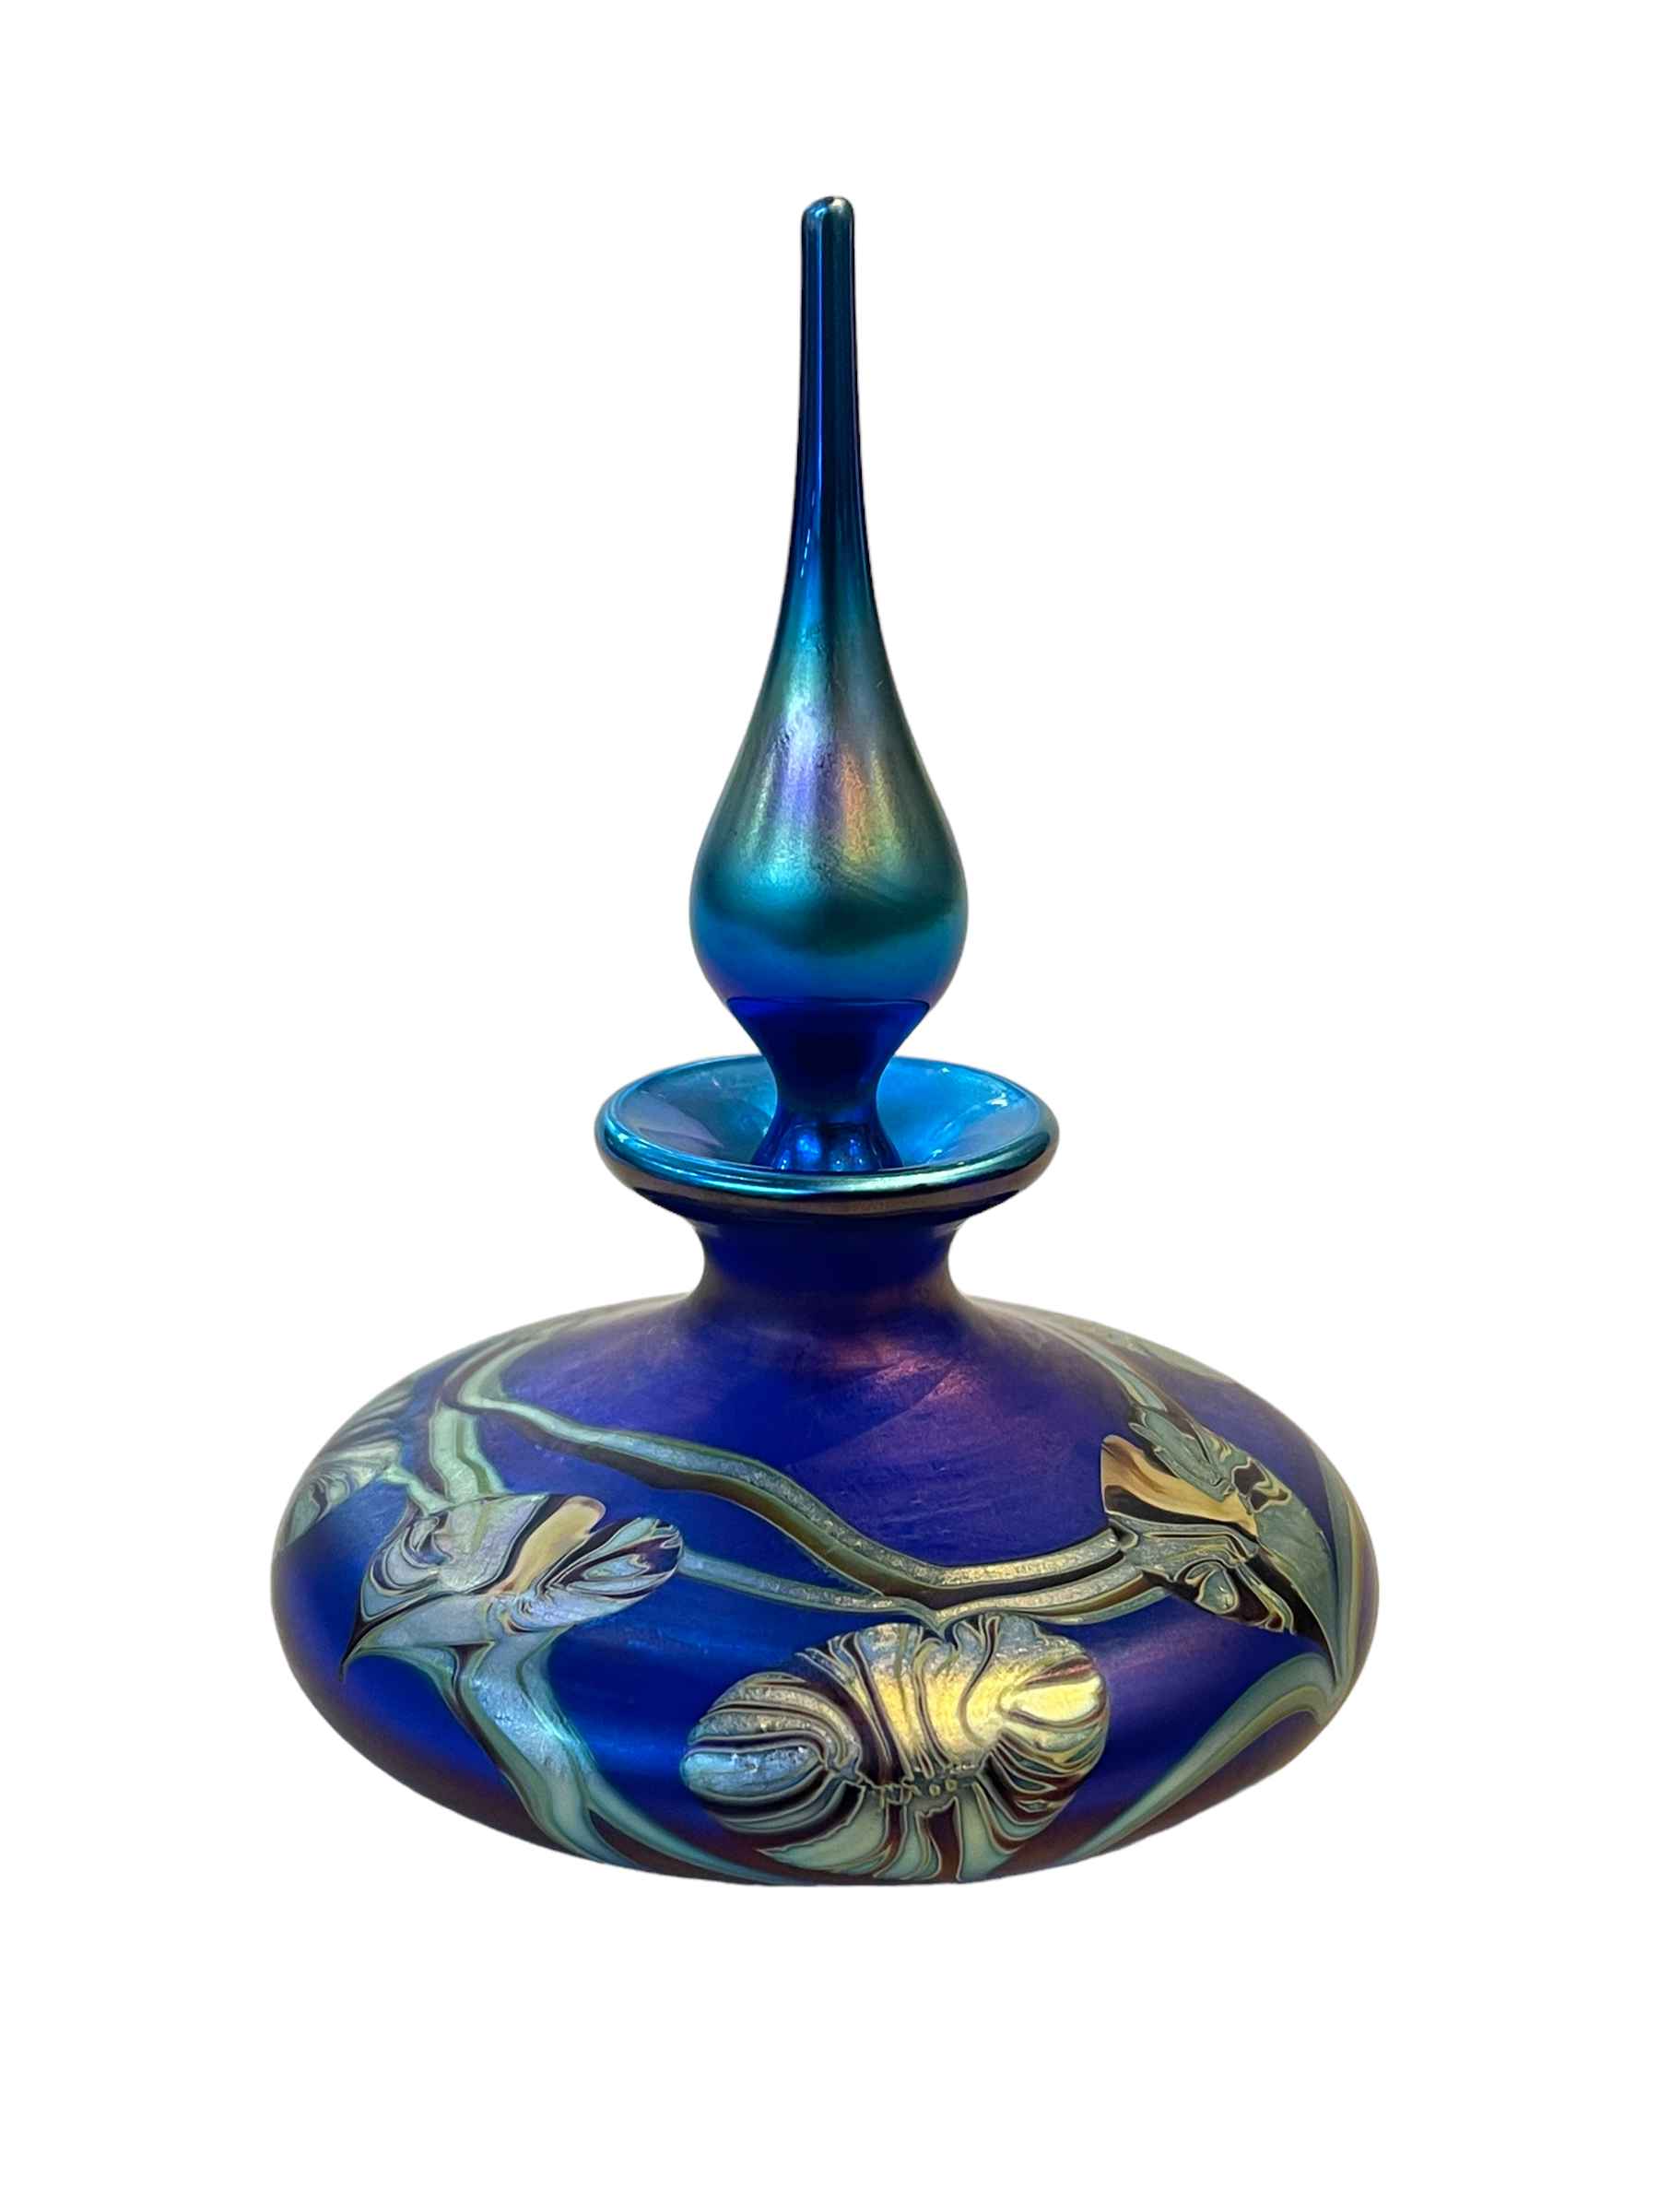 Okra limited edition iridescent scent bottle, signed by artist Richard Golding, 13.5cm.